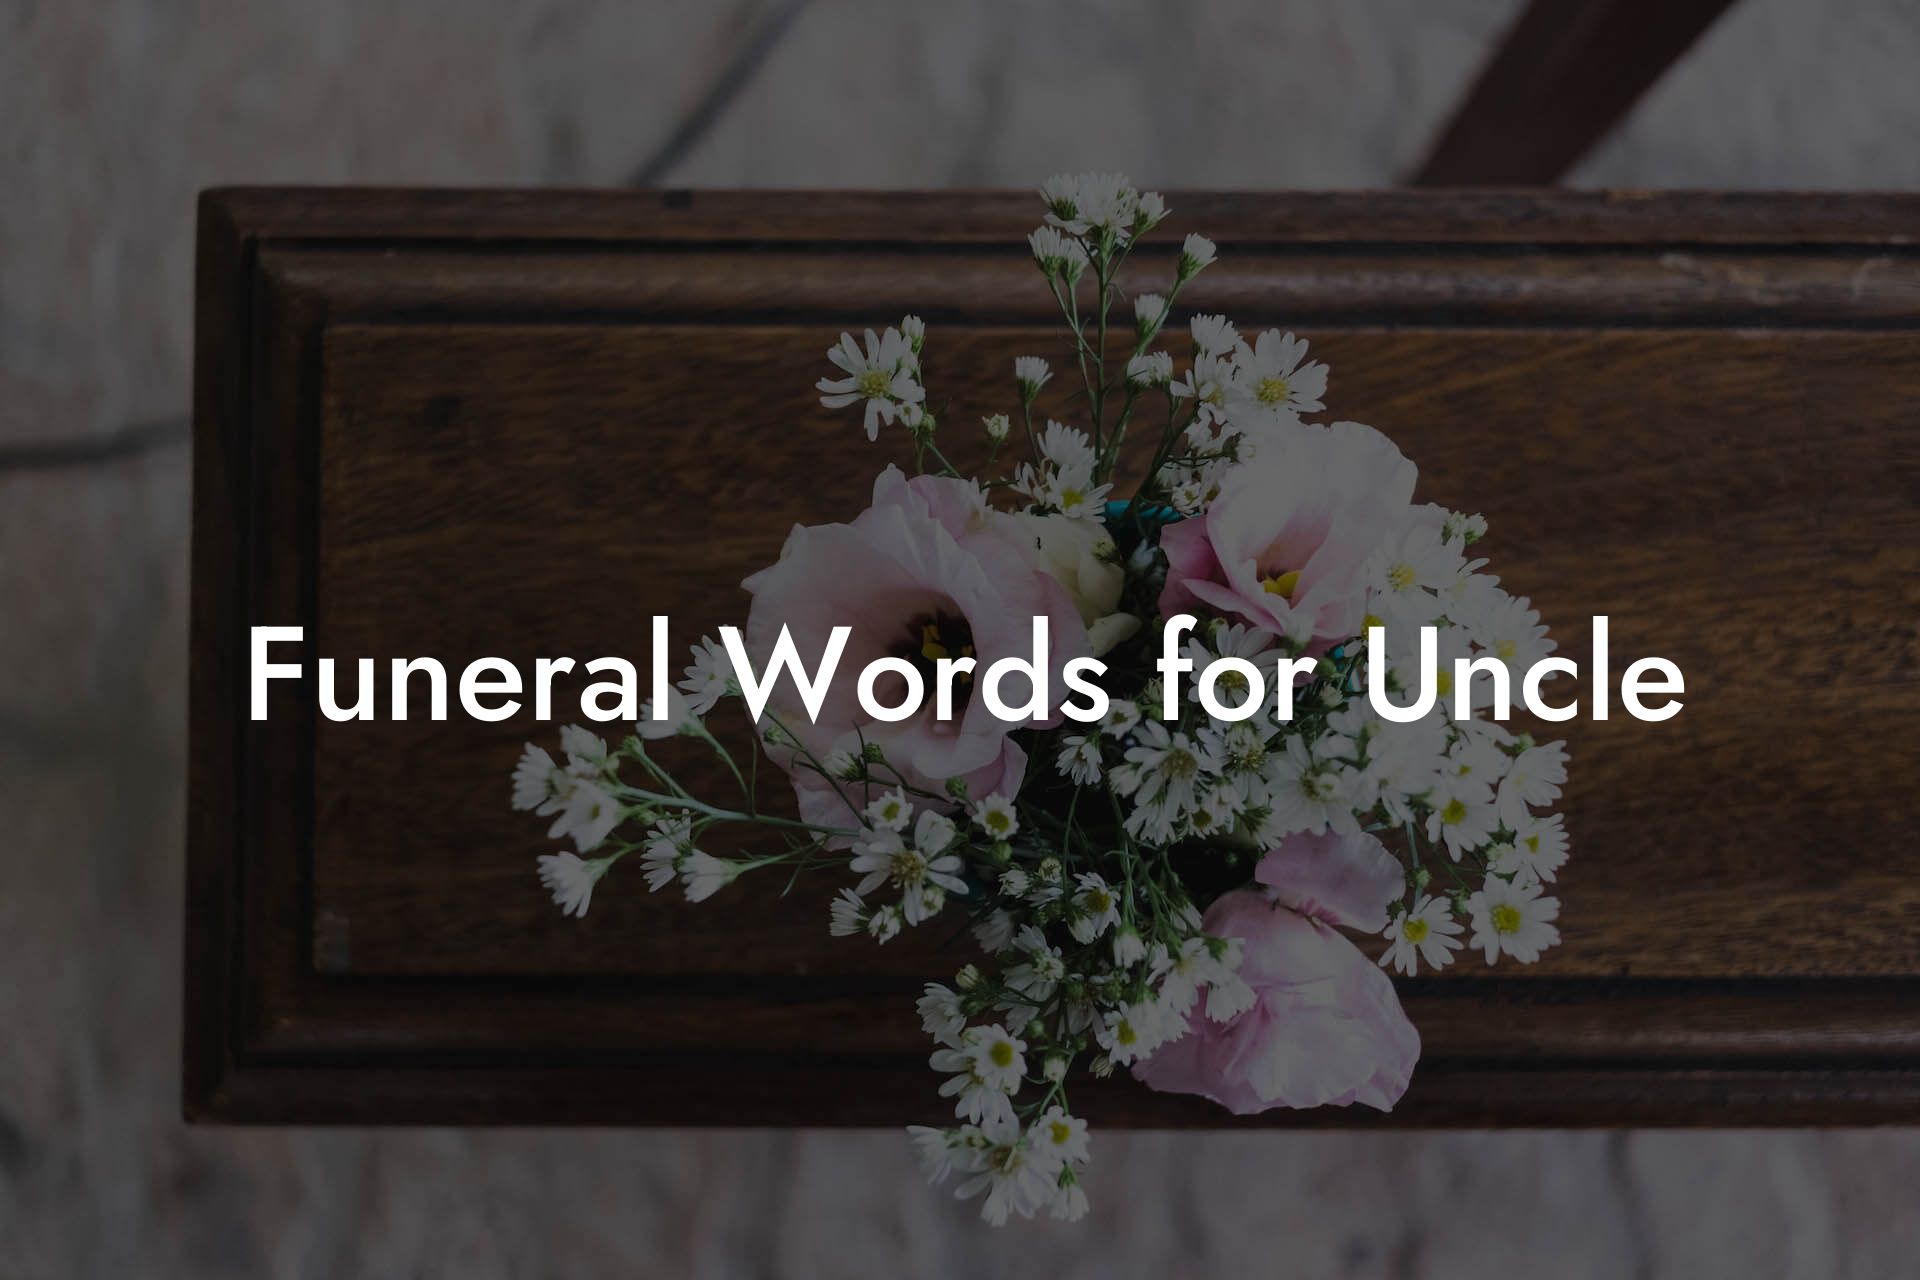 Funeral Words for Uncle